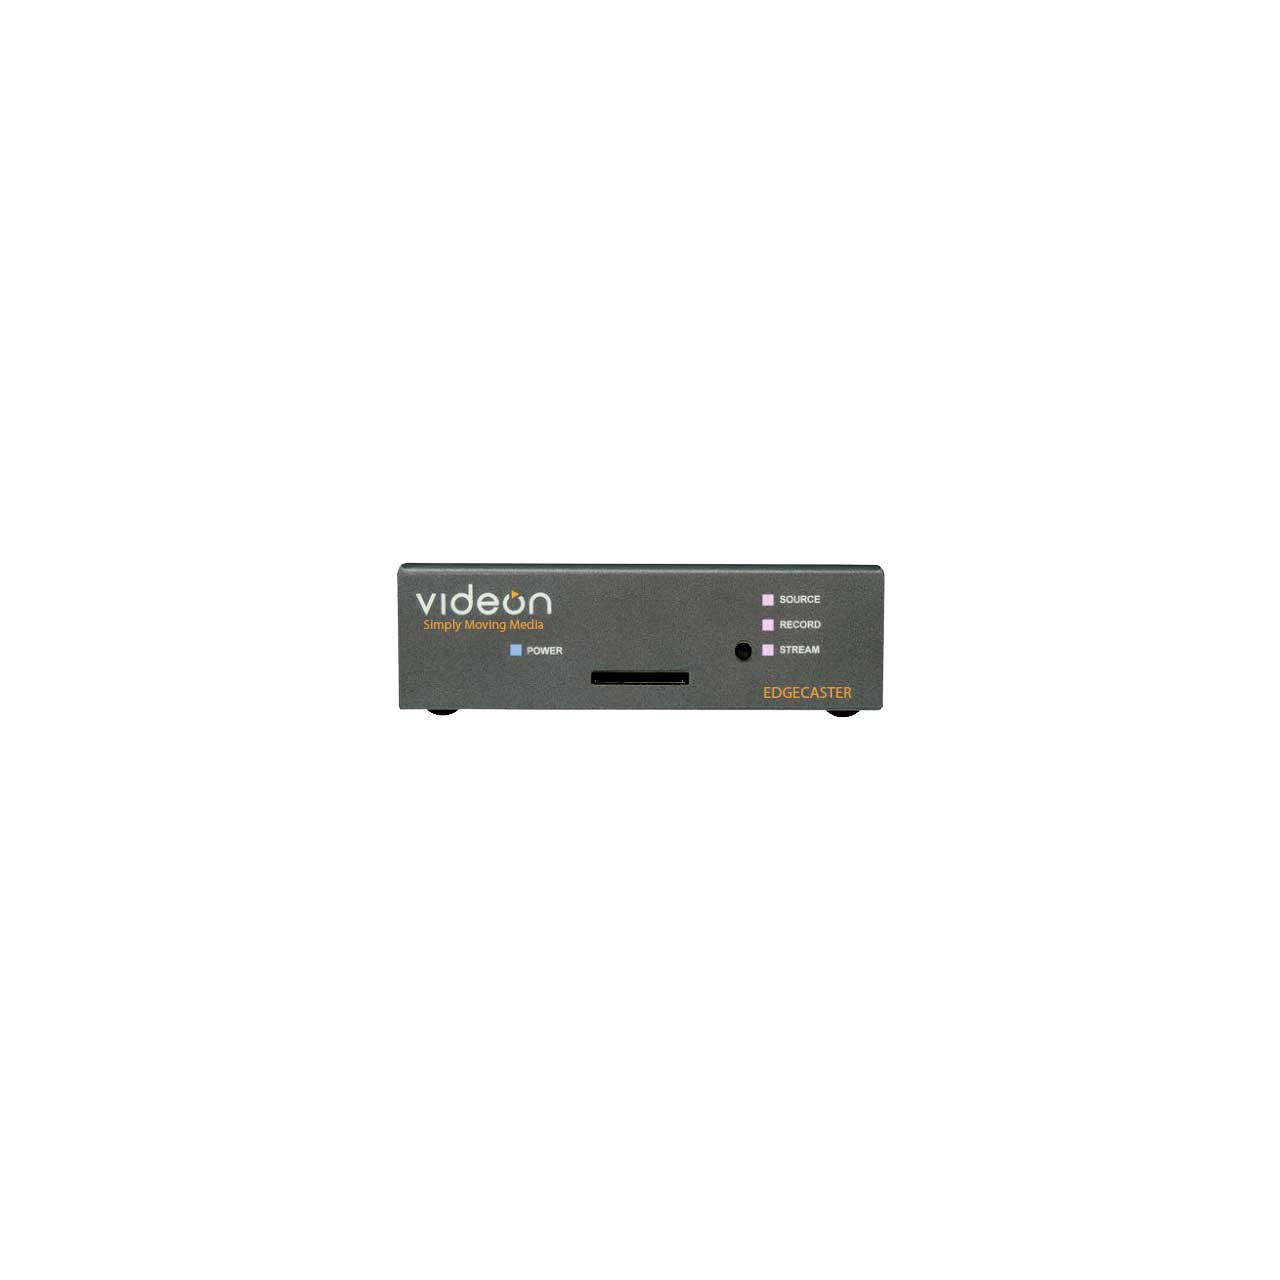 Videon EdgeCaster 4K HEVC Encoder - Low Latency CMAF - 8 Channel Audio Support VCI-EDGECASTER